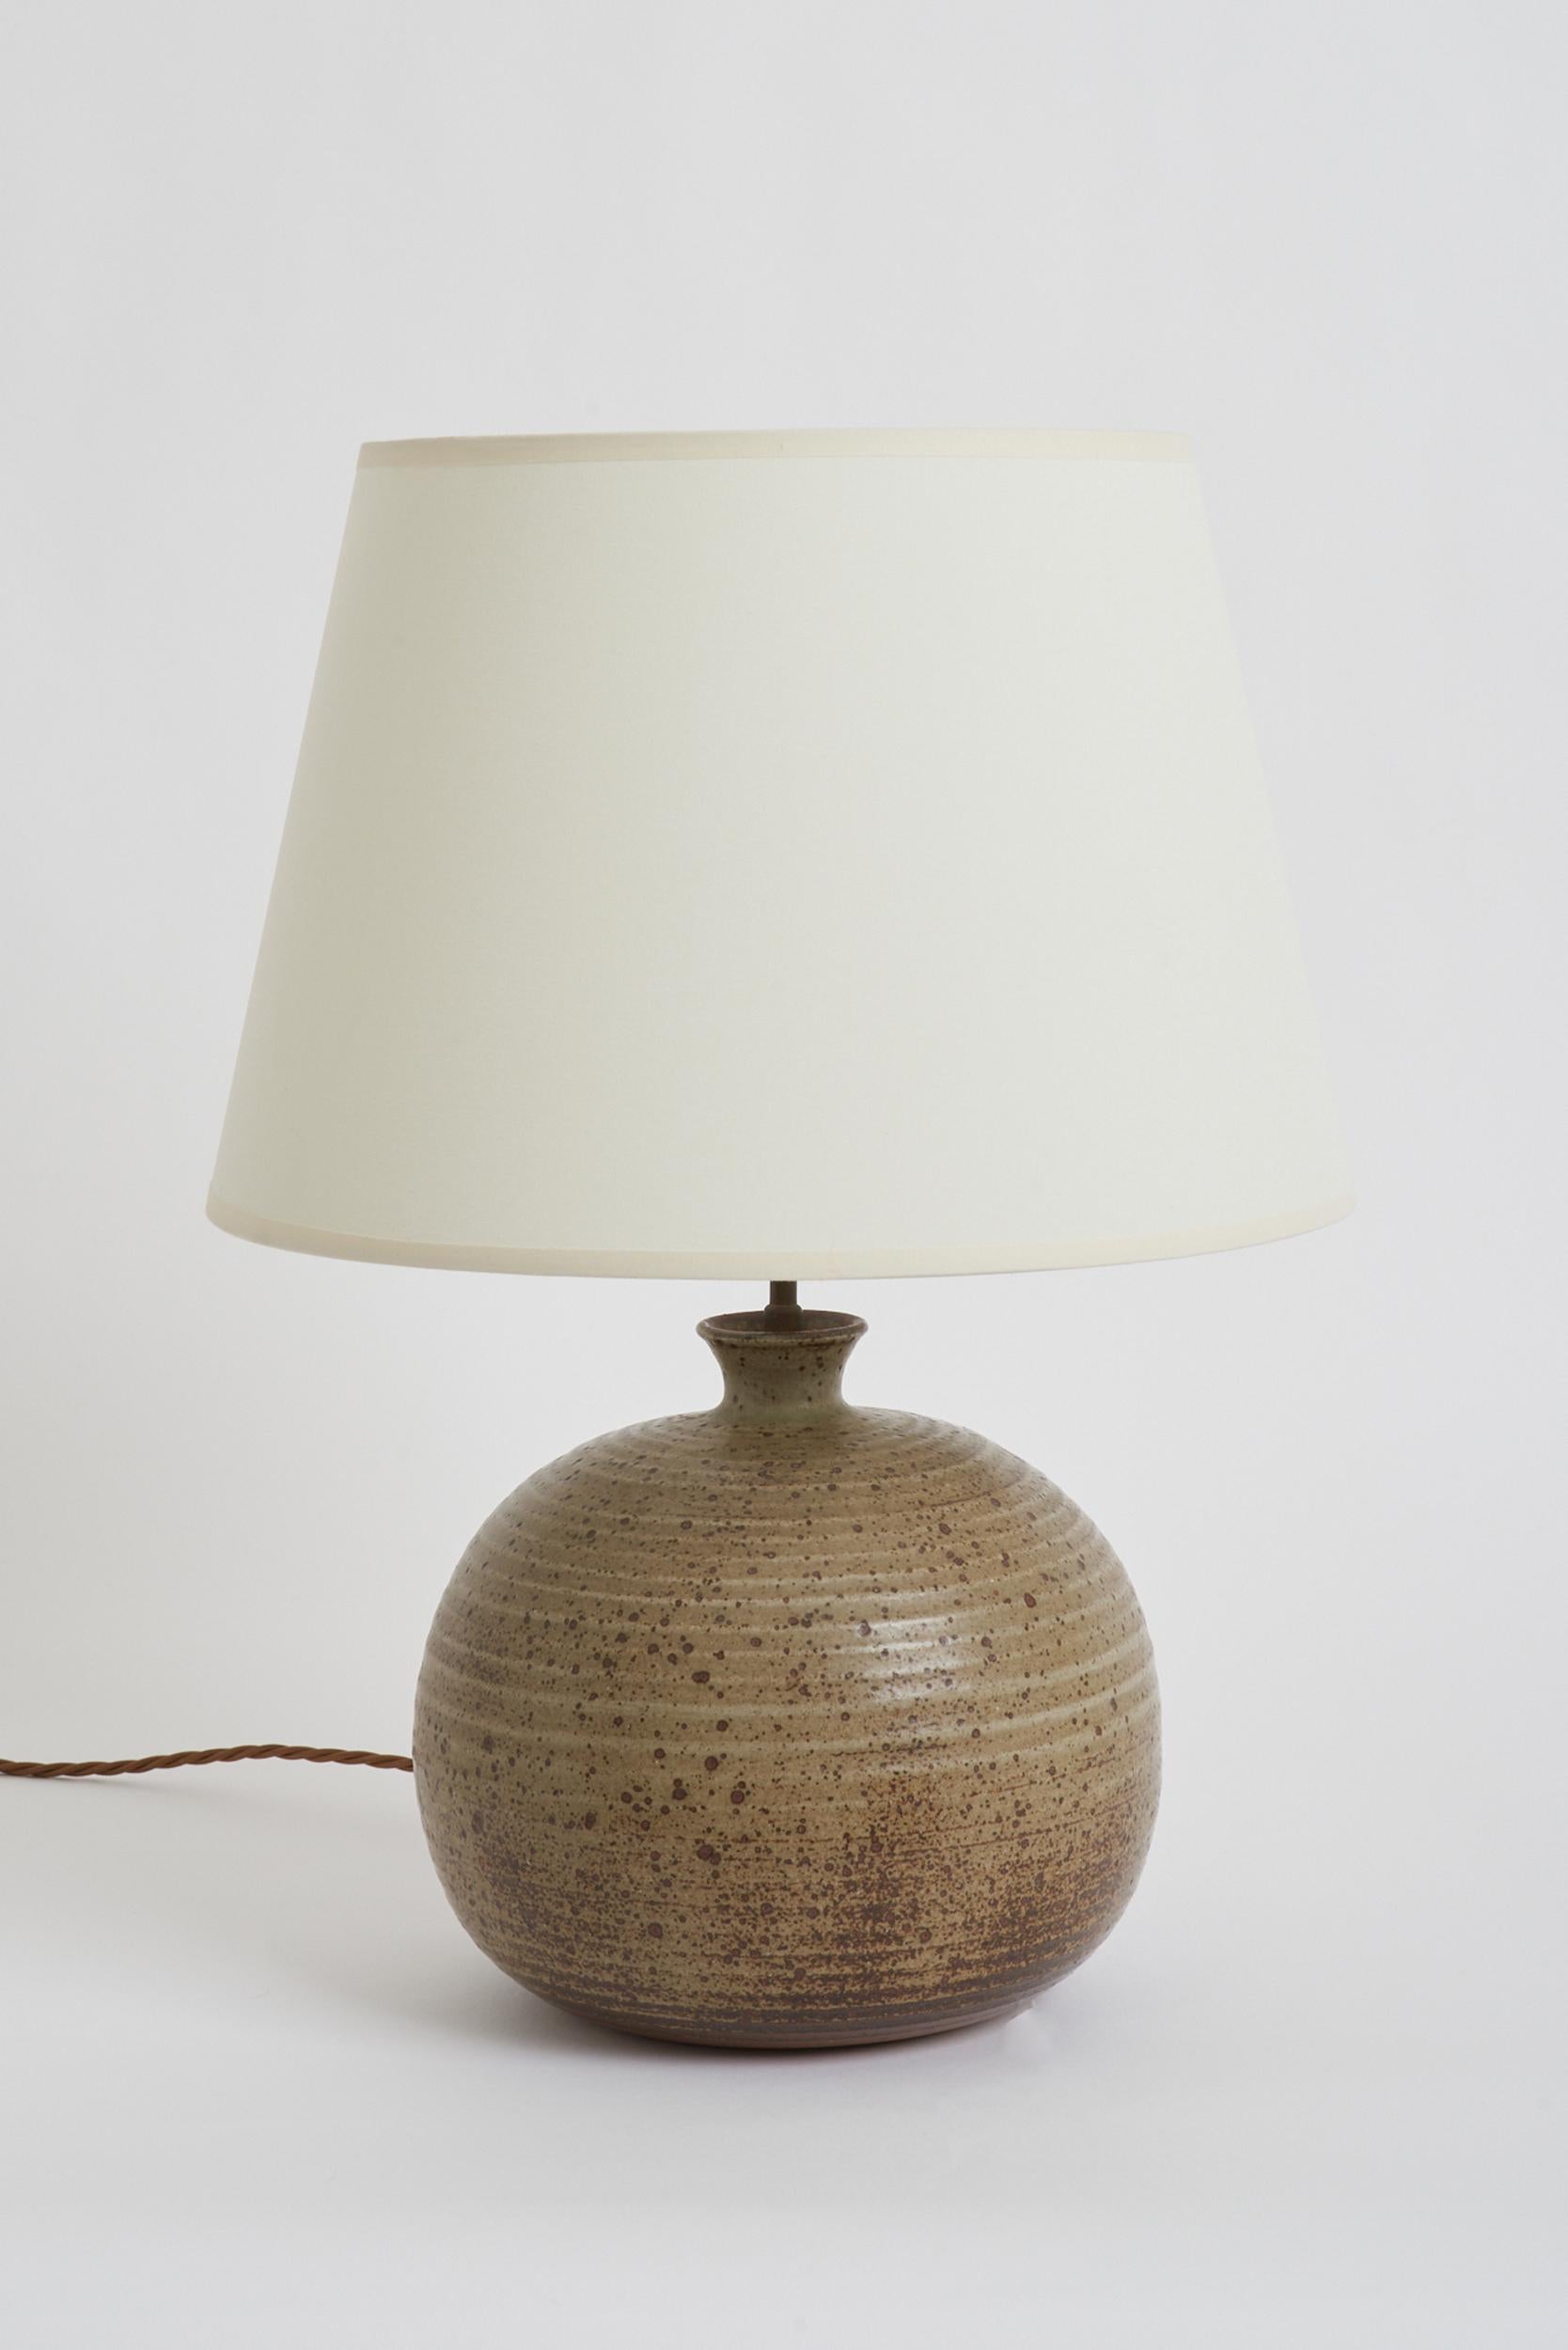 A mottled stoneware table lamp.
France, 1960s.
With the shade: 50 cm high by 35.5 cm diameter
Lamp base only: 31 cm high by 22 cm diameter.